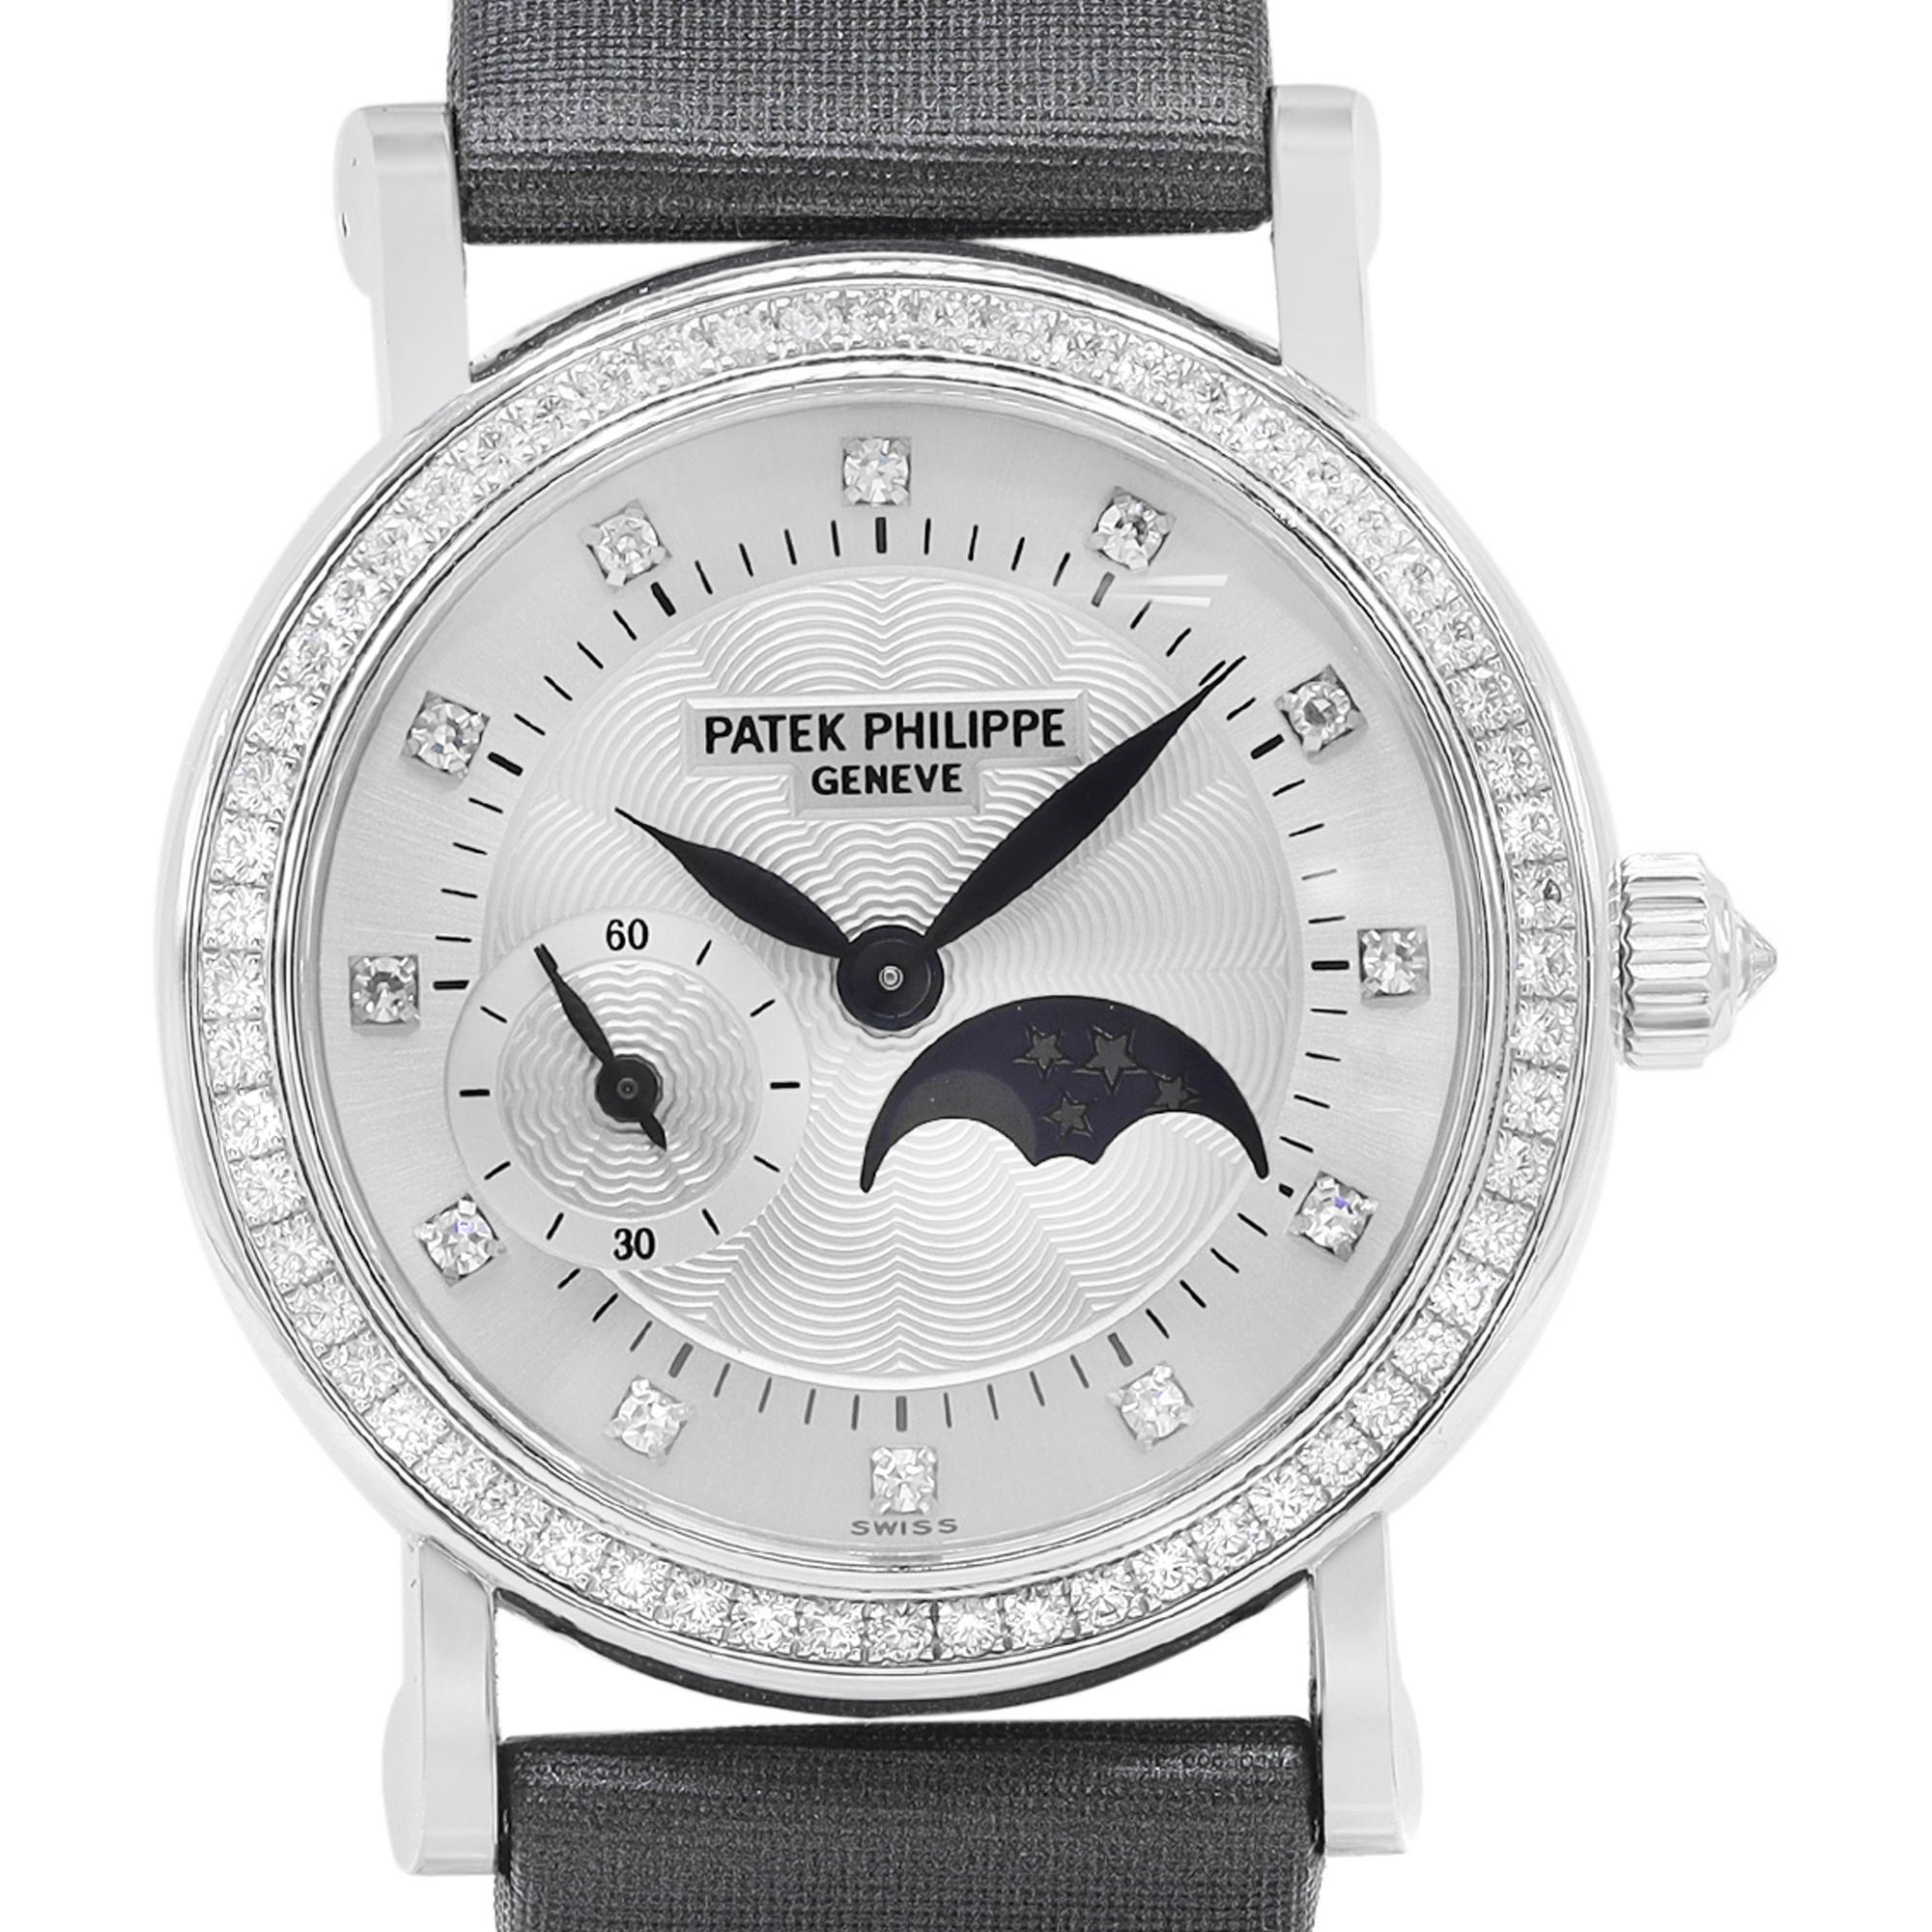 Display Model Patek Philippe Calatrava Moonphase 29mm White Gold Diamond Ladies Manual Winding Watch 4858G. The Watch is powered by a Mechanical (Manual Winding) Movement and Features: Polished 18k White Gold Round Case and Two-Piece Gray Nylon